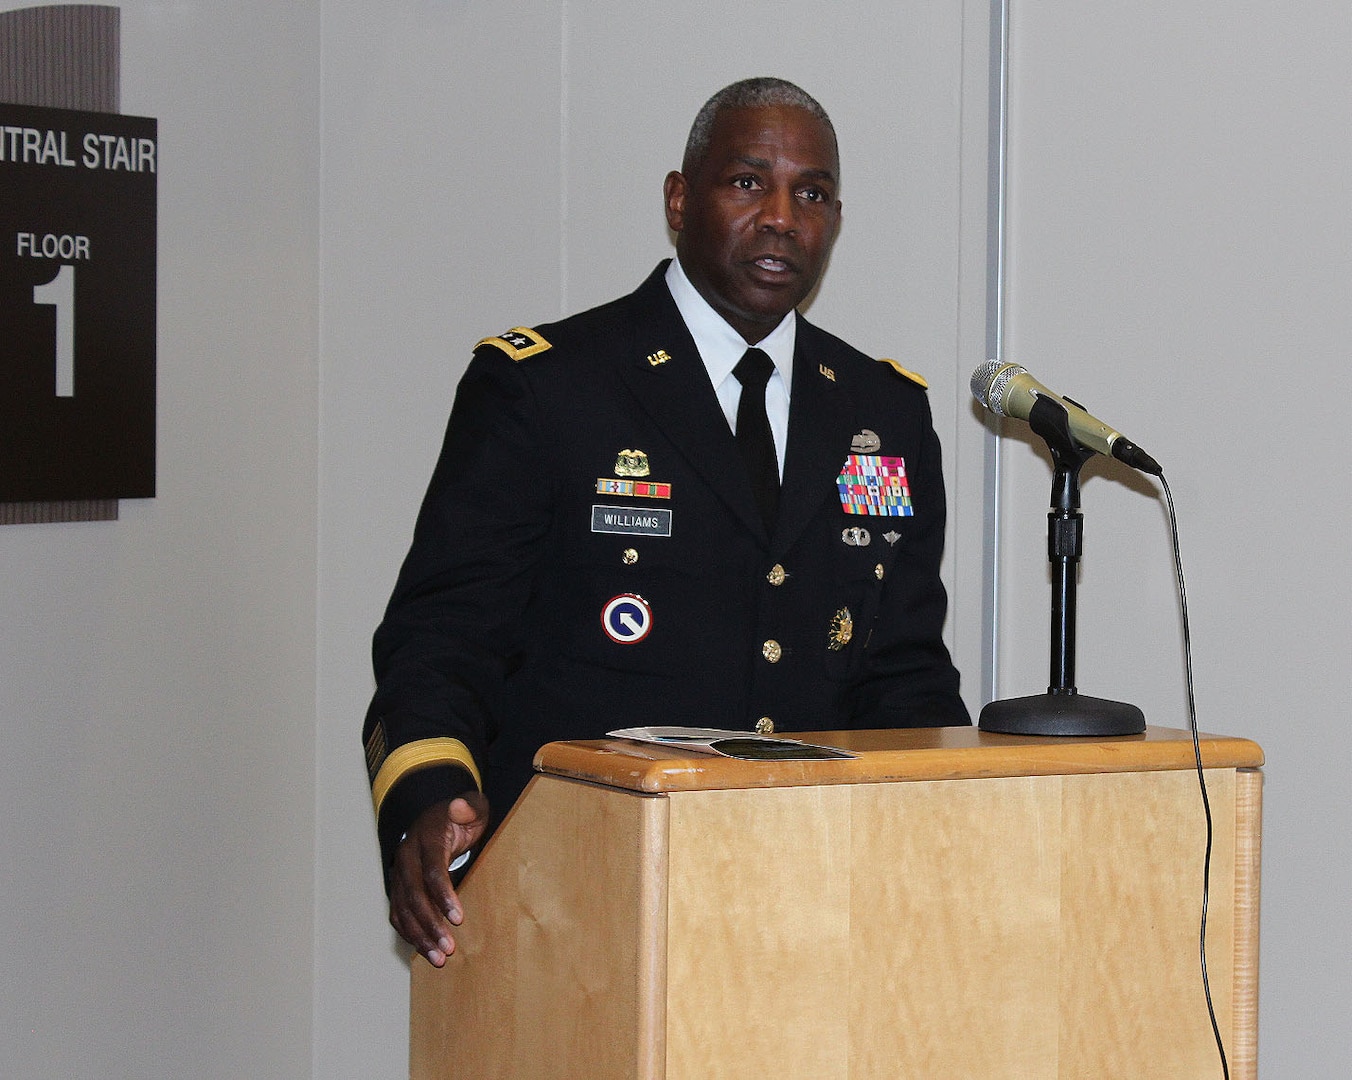 Army Lt. Gen. Darrell Williams, director of the Defense Logistics Agency, speaks during the ribbon cutting ceremony for the new Defense Logistics Agency Troop Support headquarters building on Dec. 10, 2019. The new, four-story building includes amenities for 400 members of the Troop Support workforce. (Photo by Nancy Benecki)